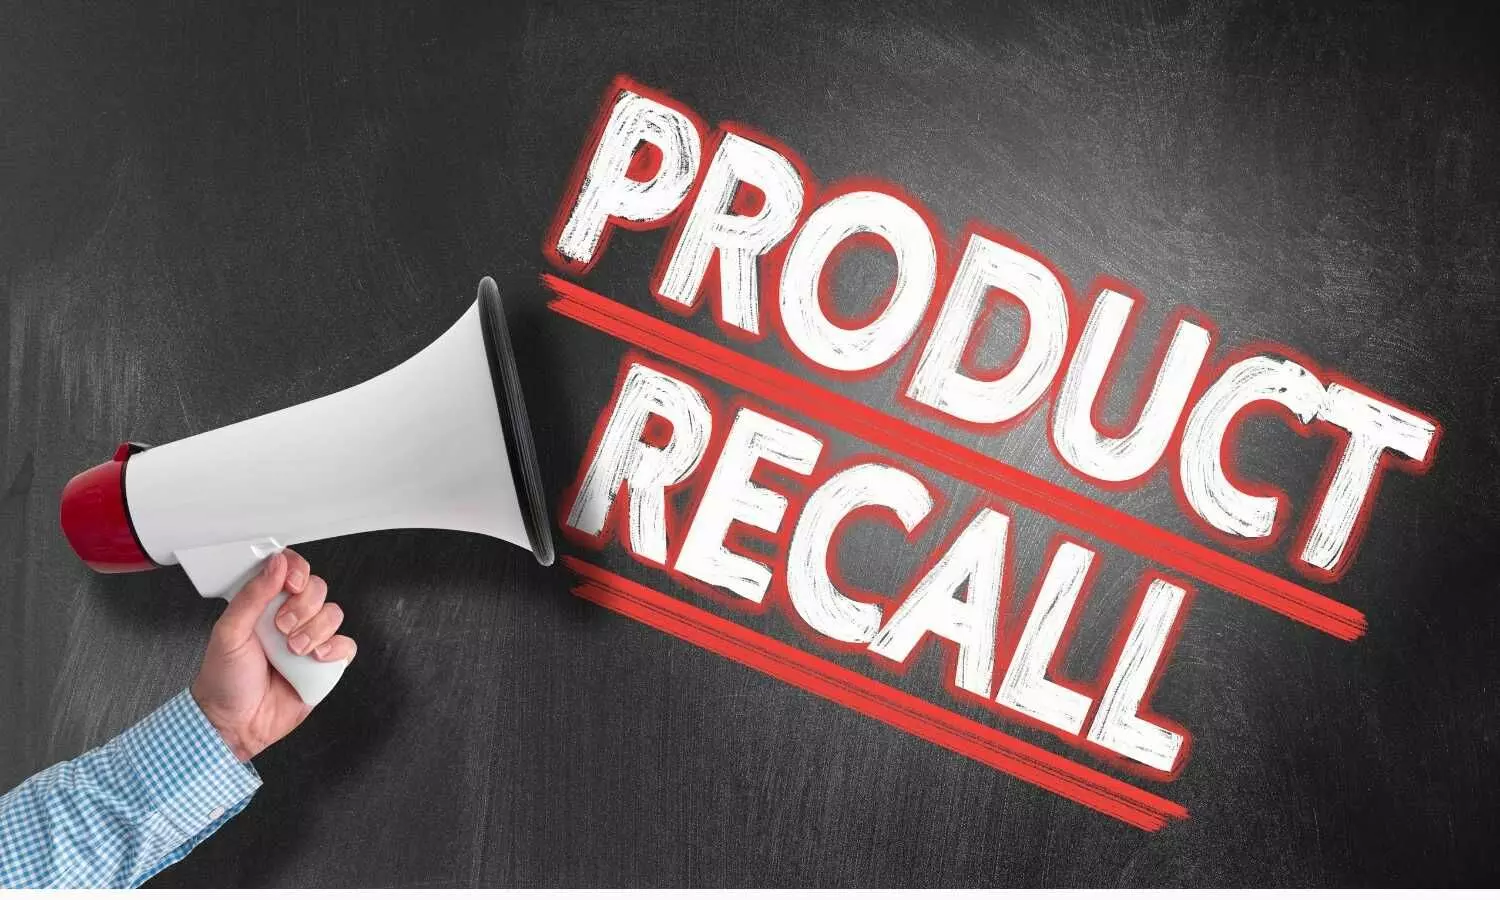 Sun Pharma recalls over 34000 bottles of generic medication in US due to failed dissolution testing